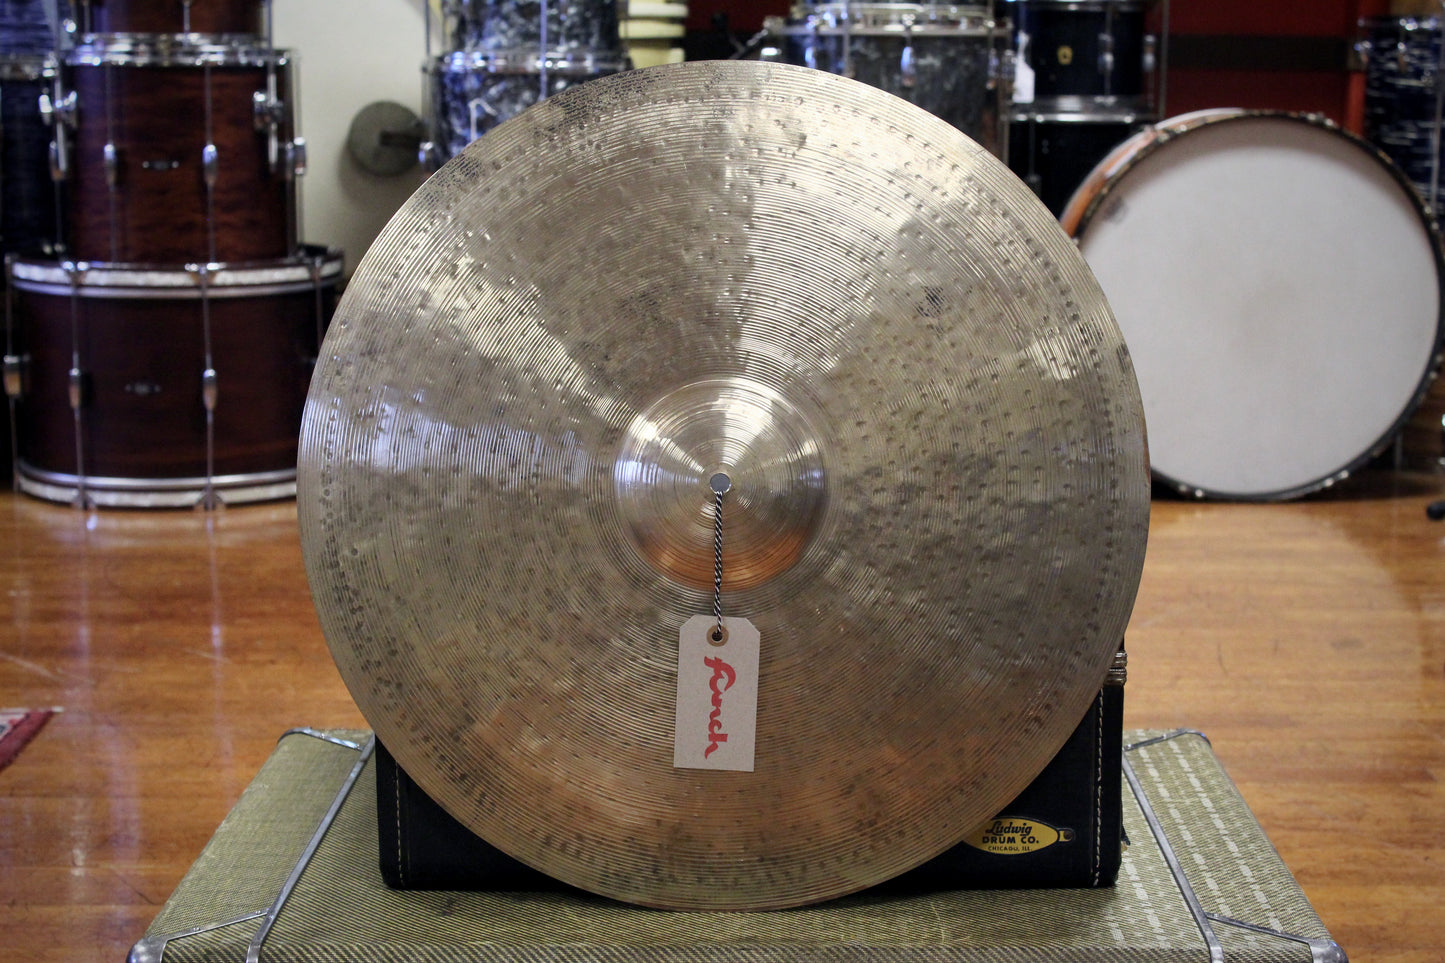 Funch Cymbals 22" 5th Anniversary Ride Cymbal 2587g